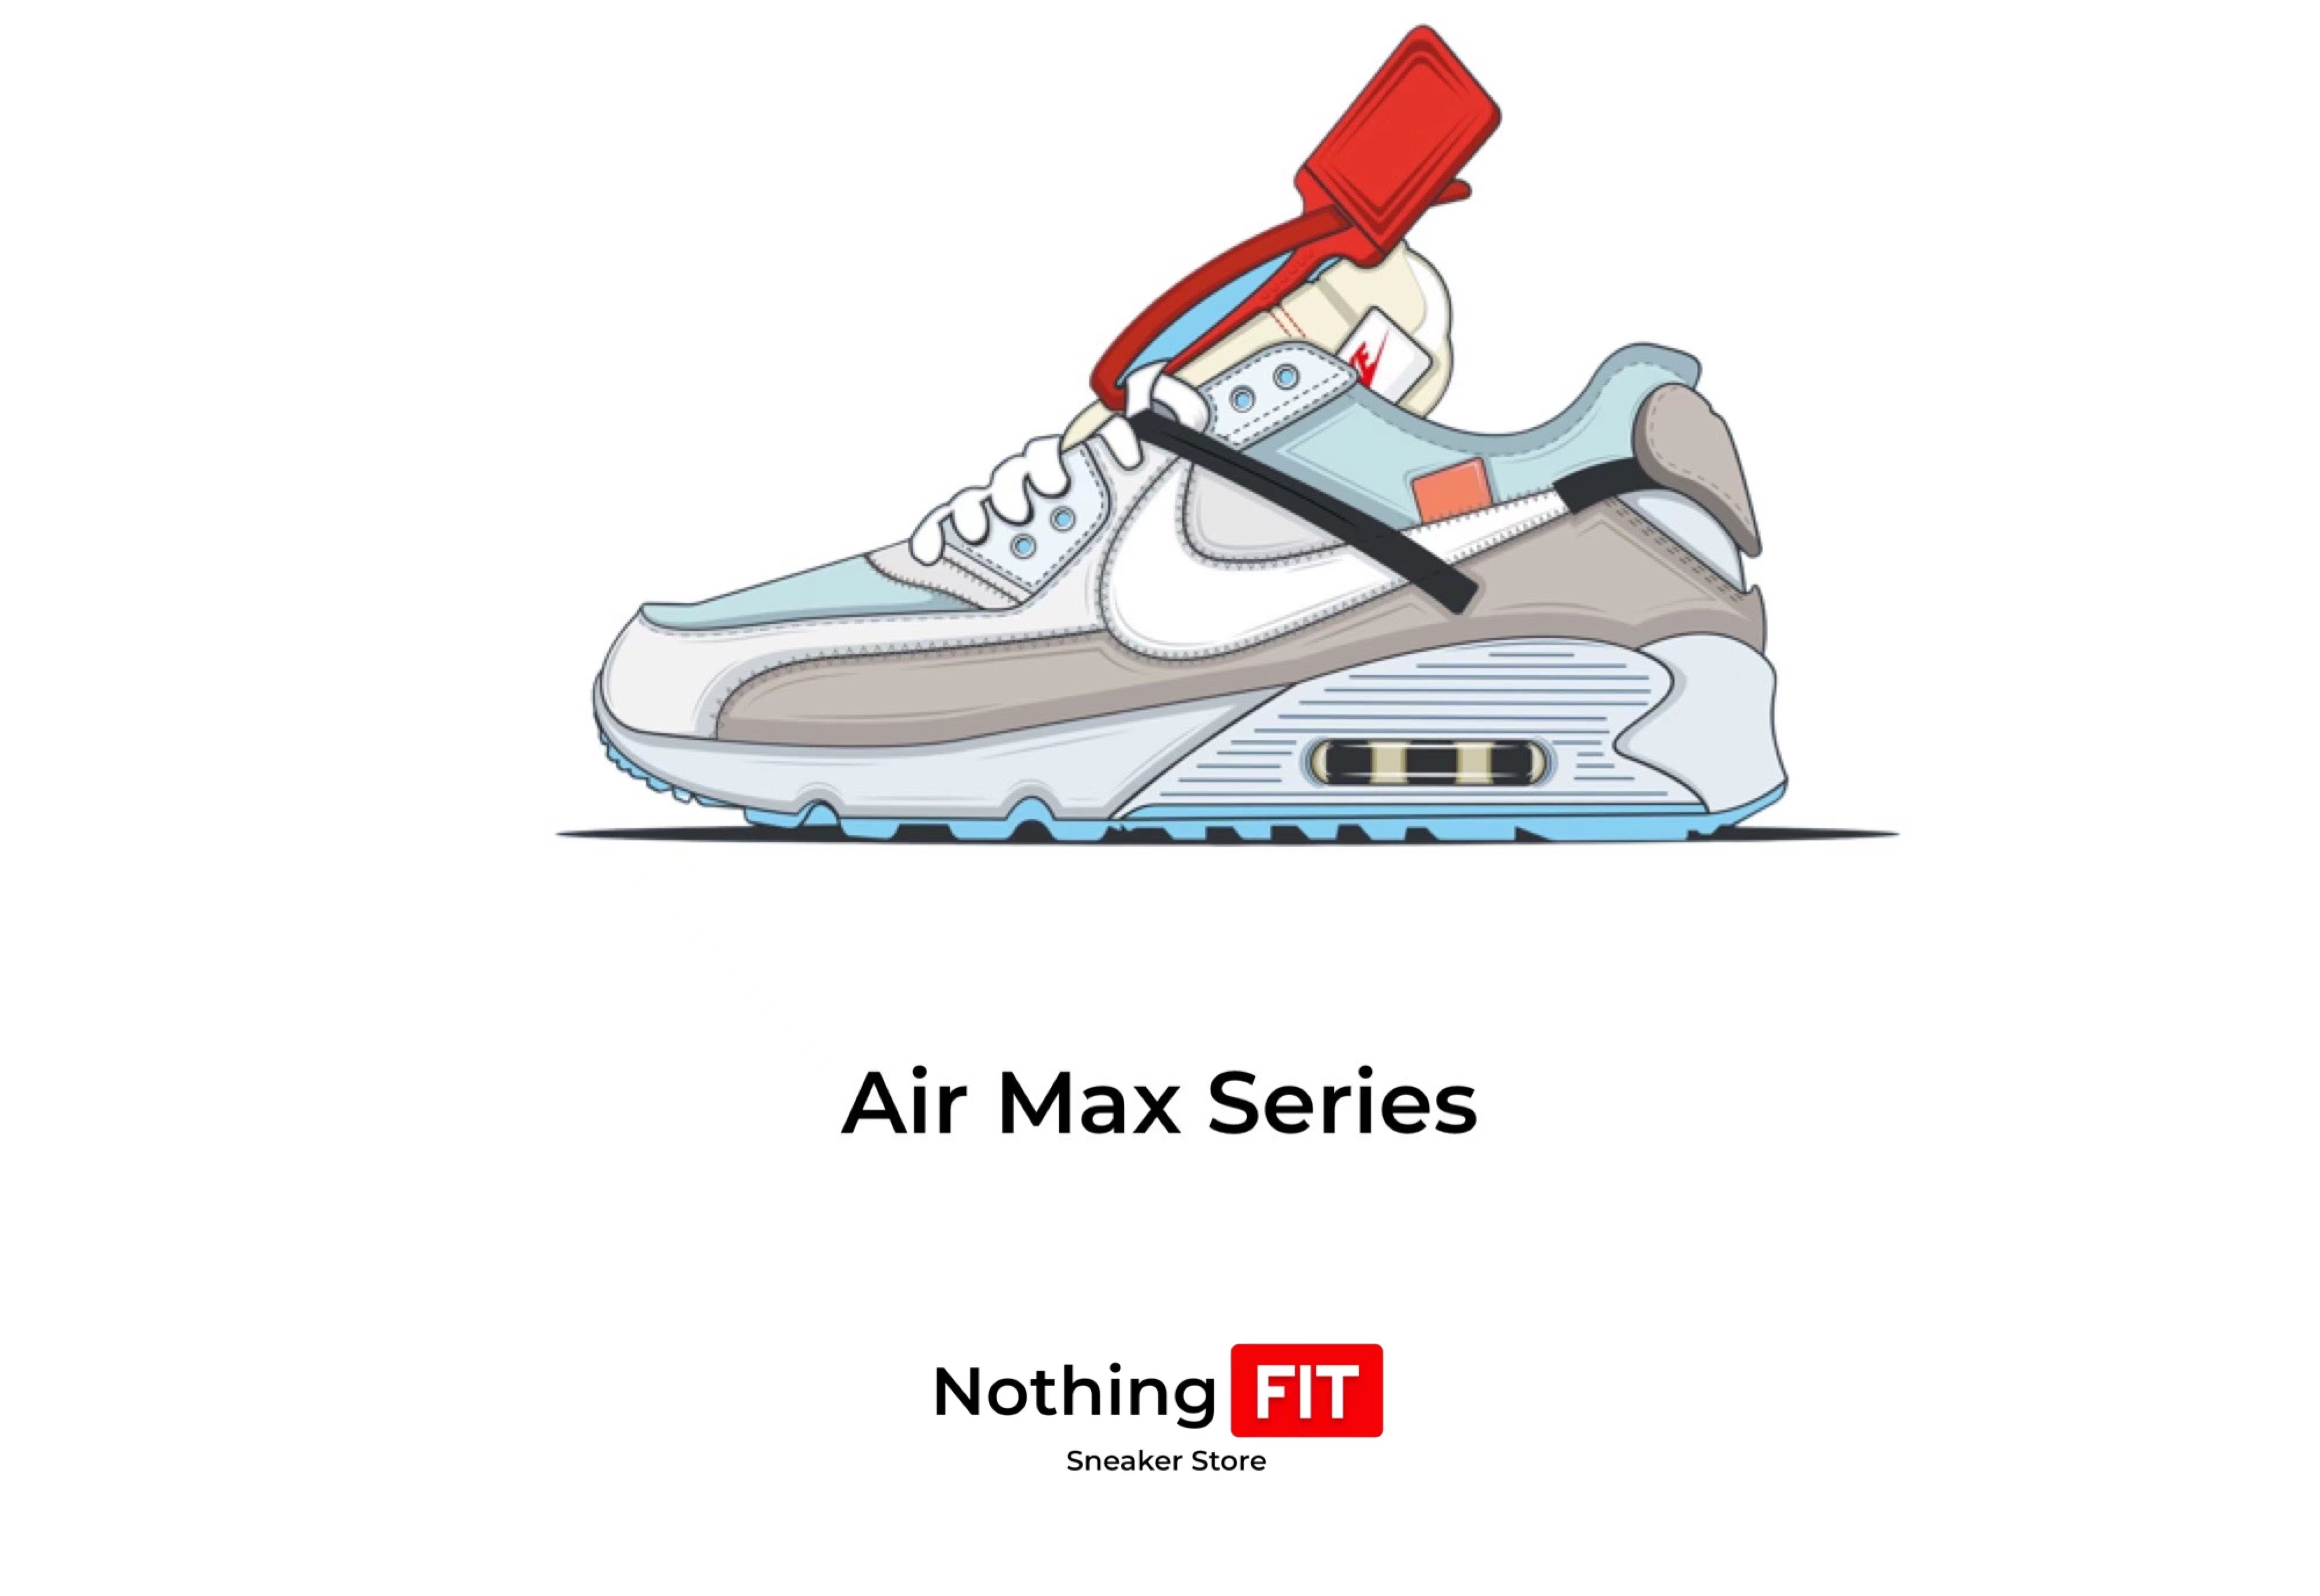 THE AIRMAX SERIES – Nothing FiT